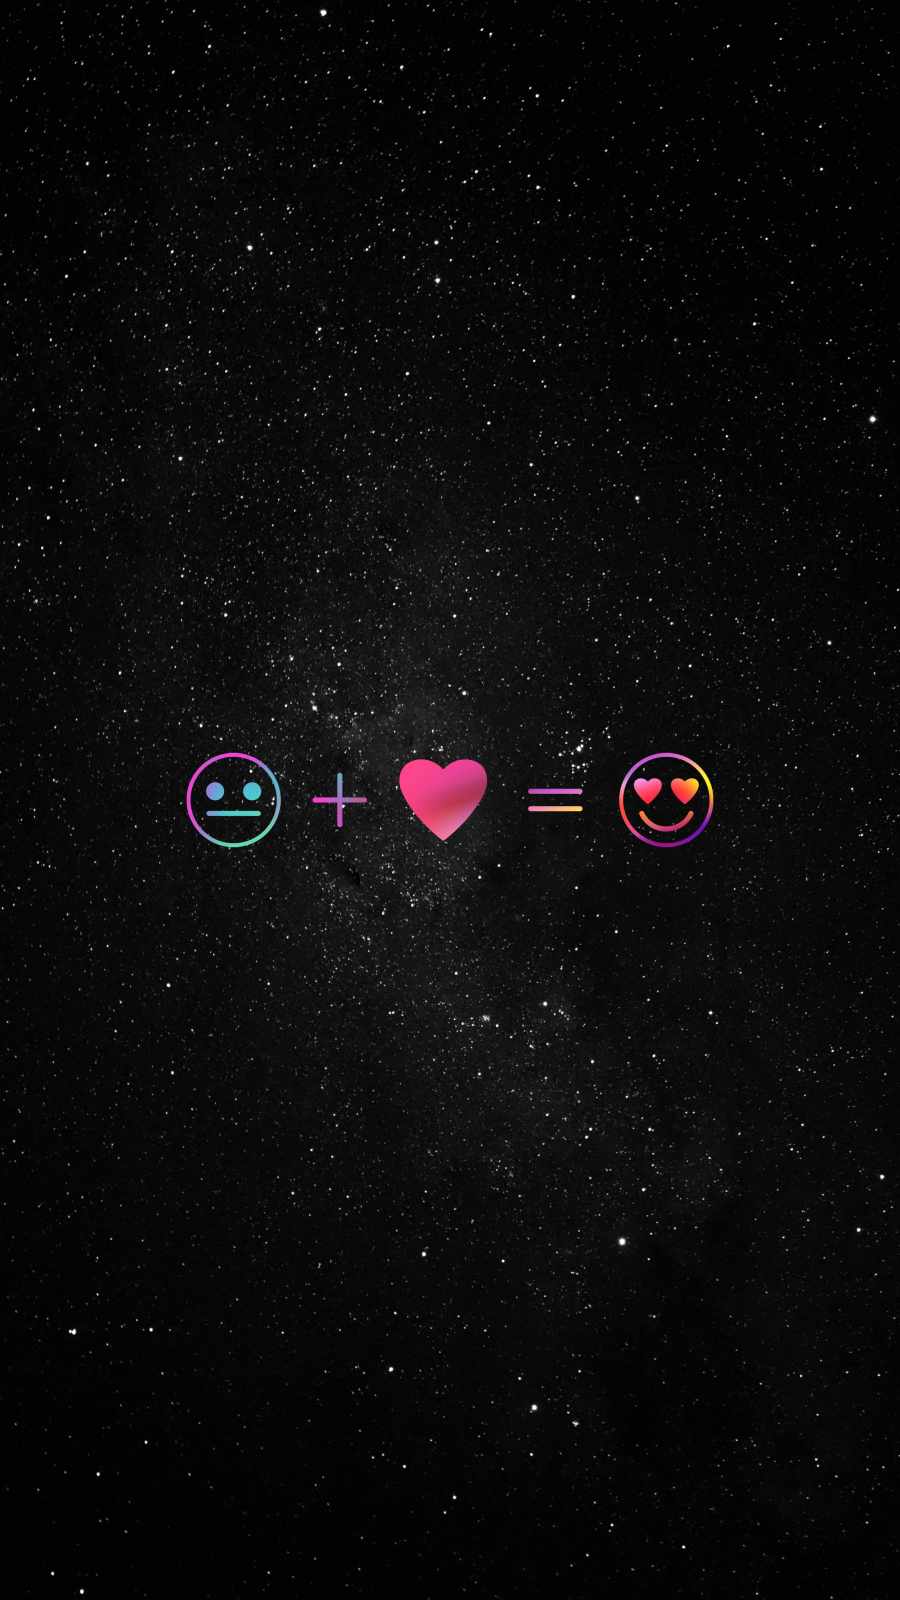 Love Universe IPhone Wallpaper - IPhone Wallpapers : iPhone Wallpapers